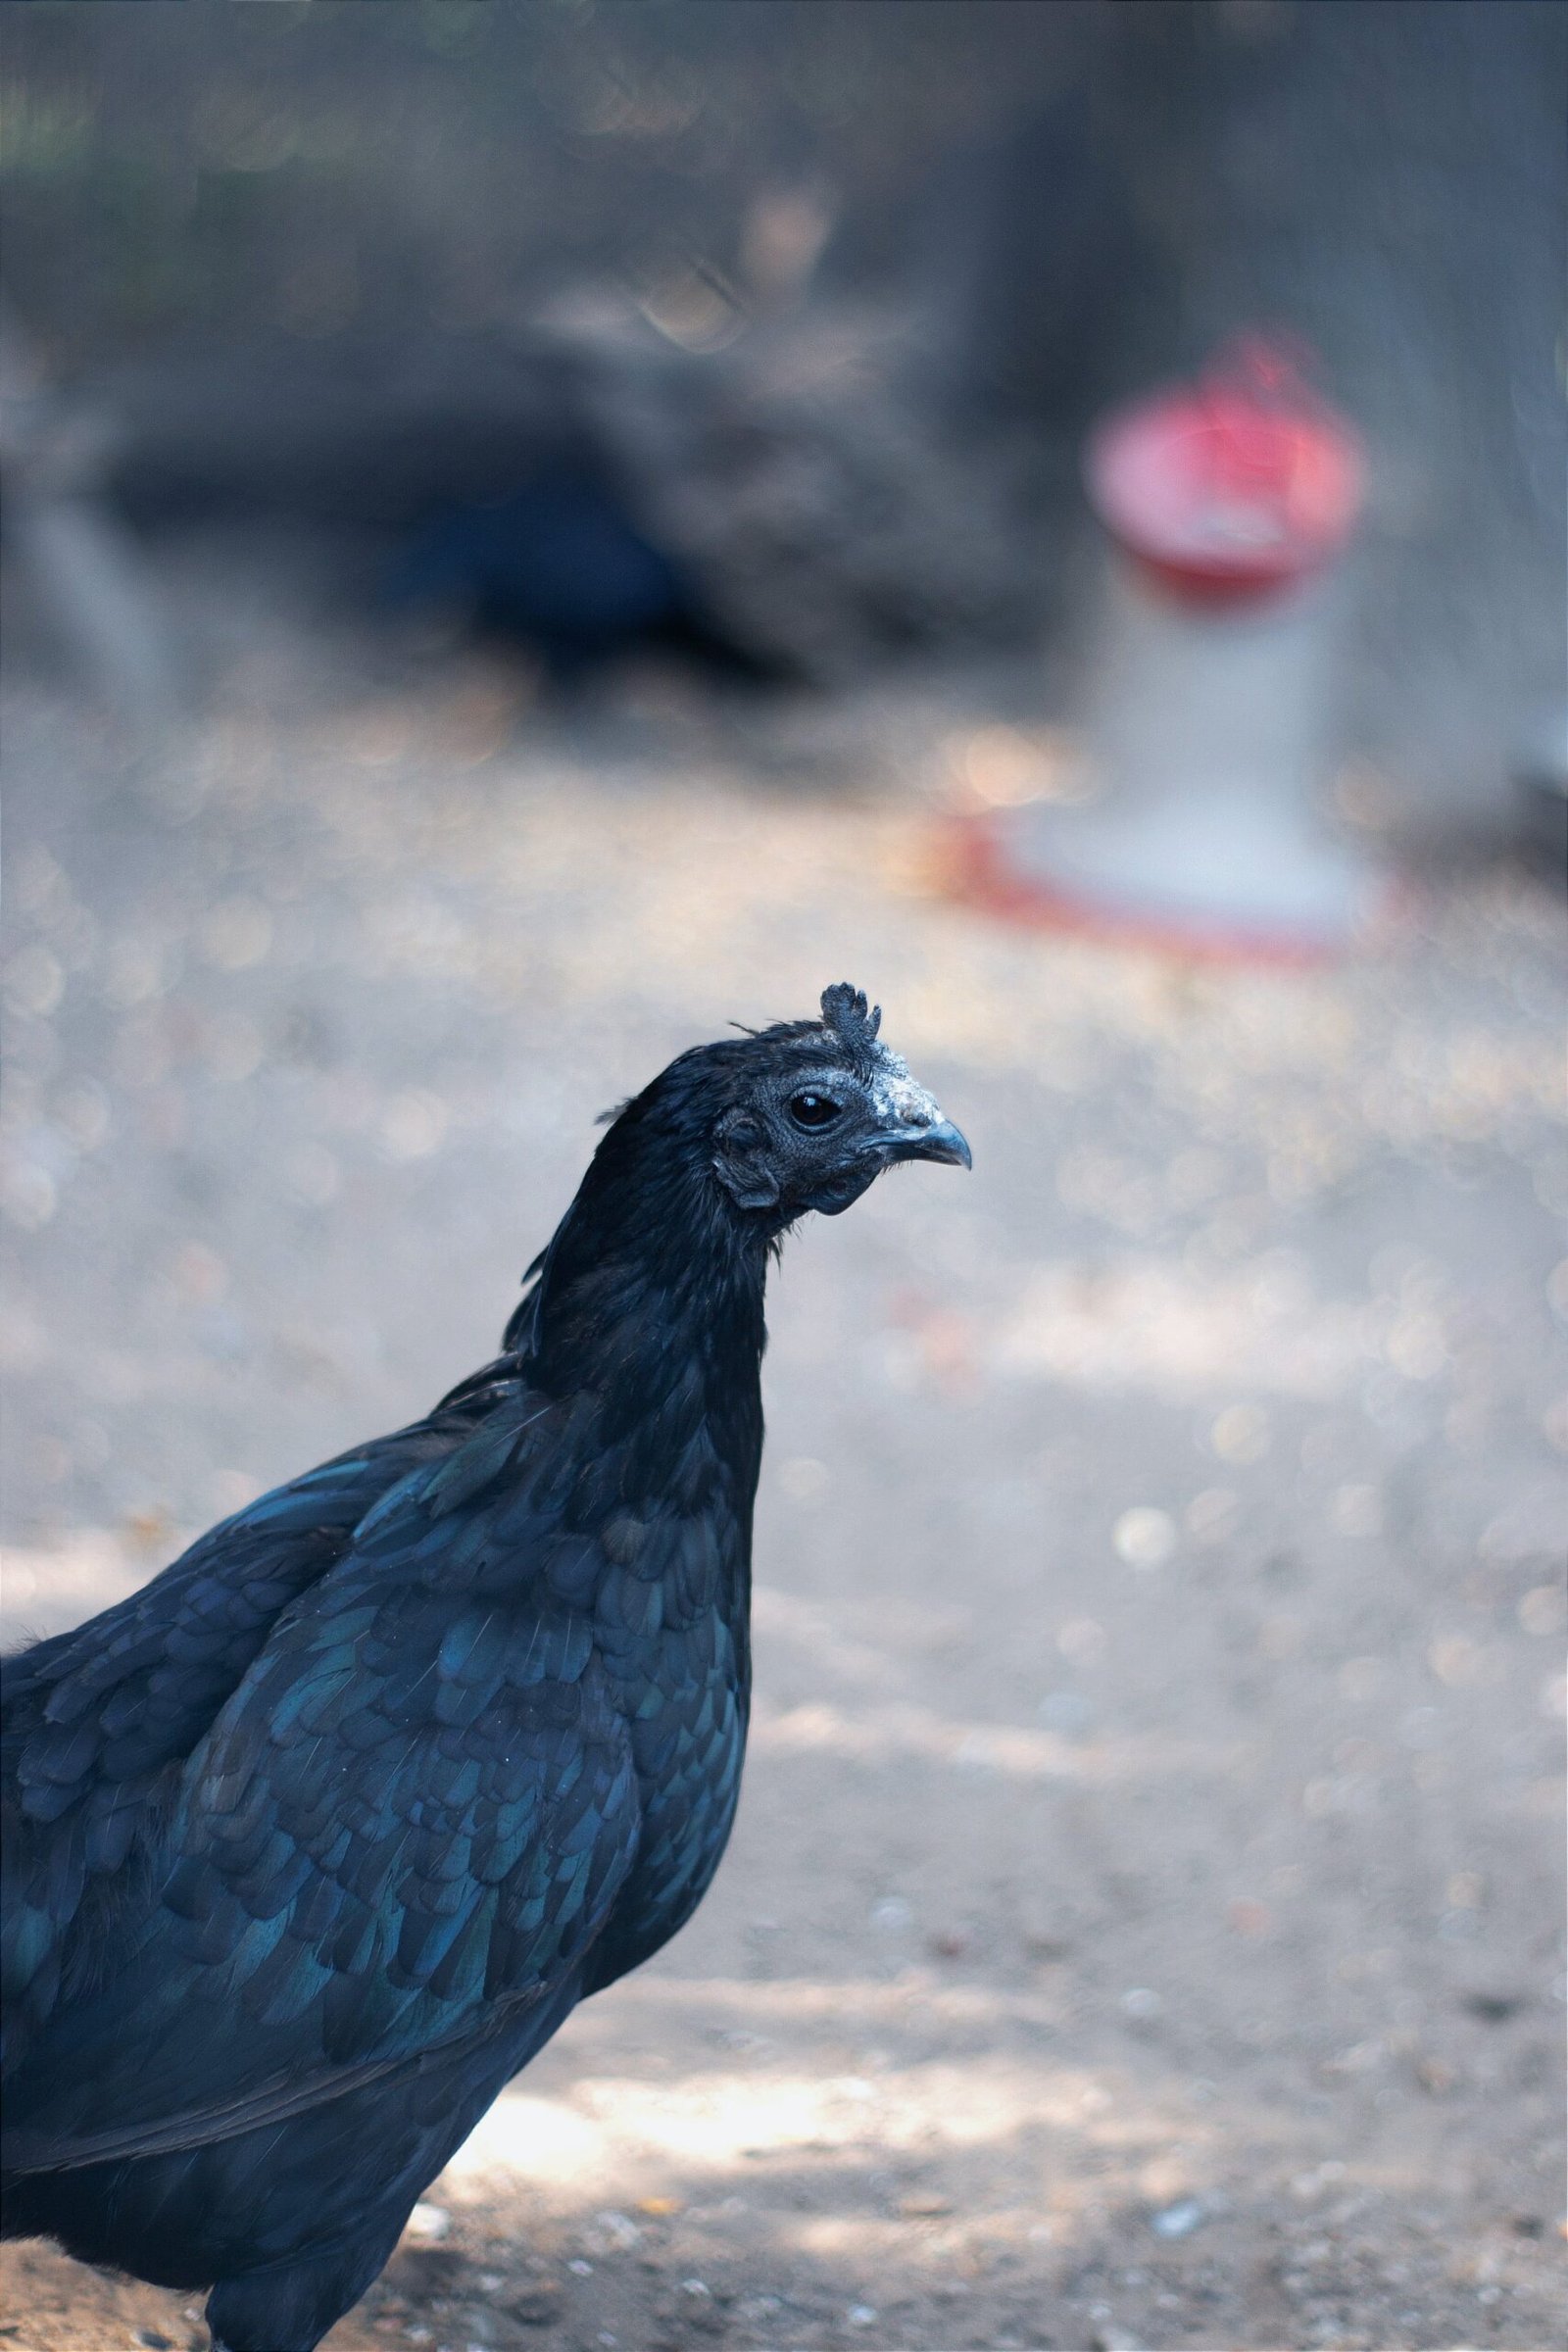 How Do You Encourage Chickens To Consume Calcium Supplements?